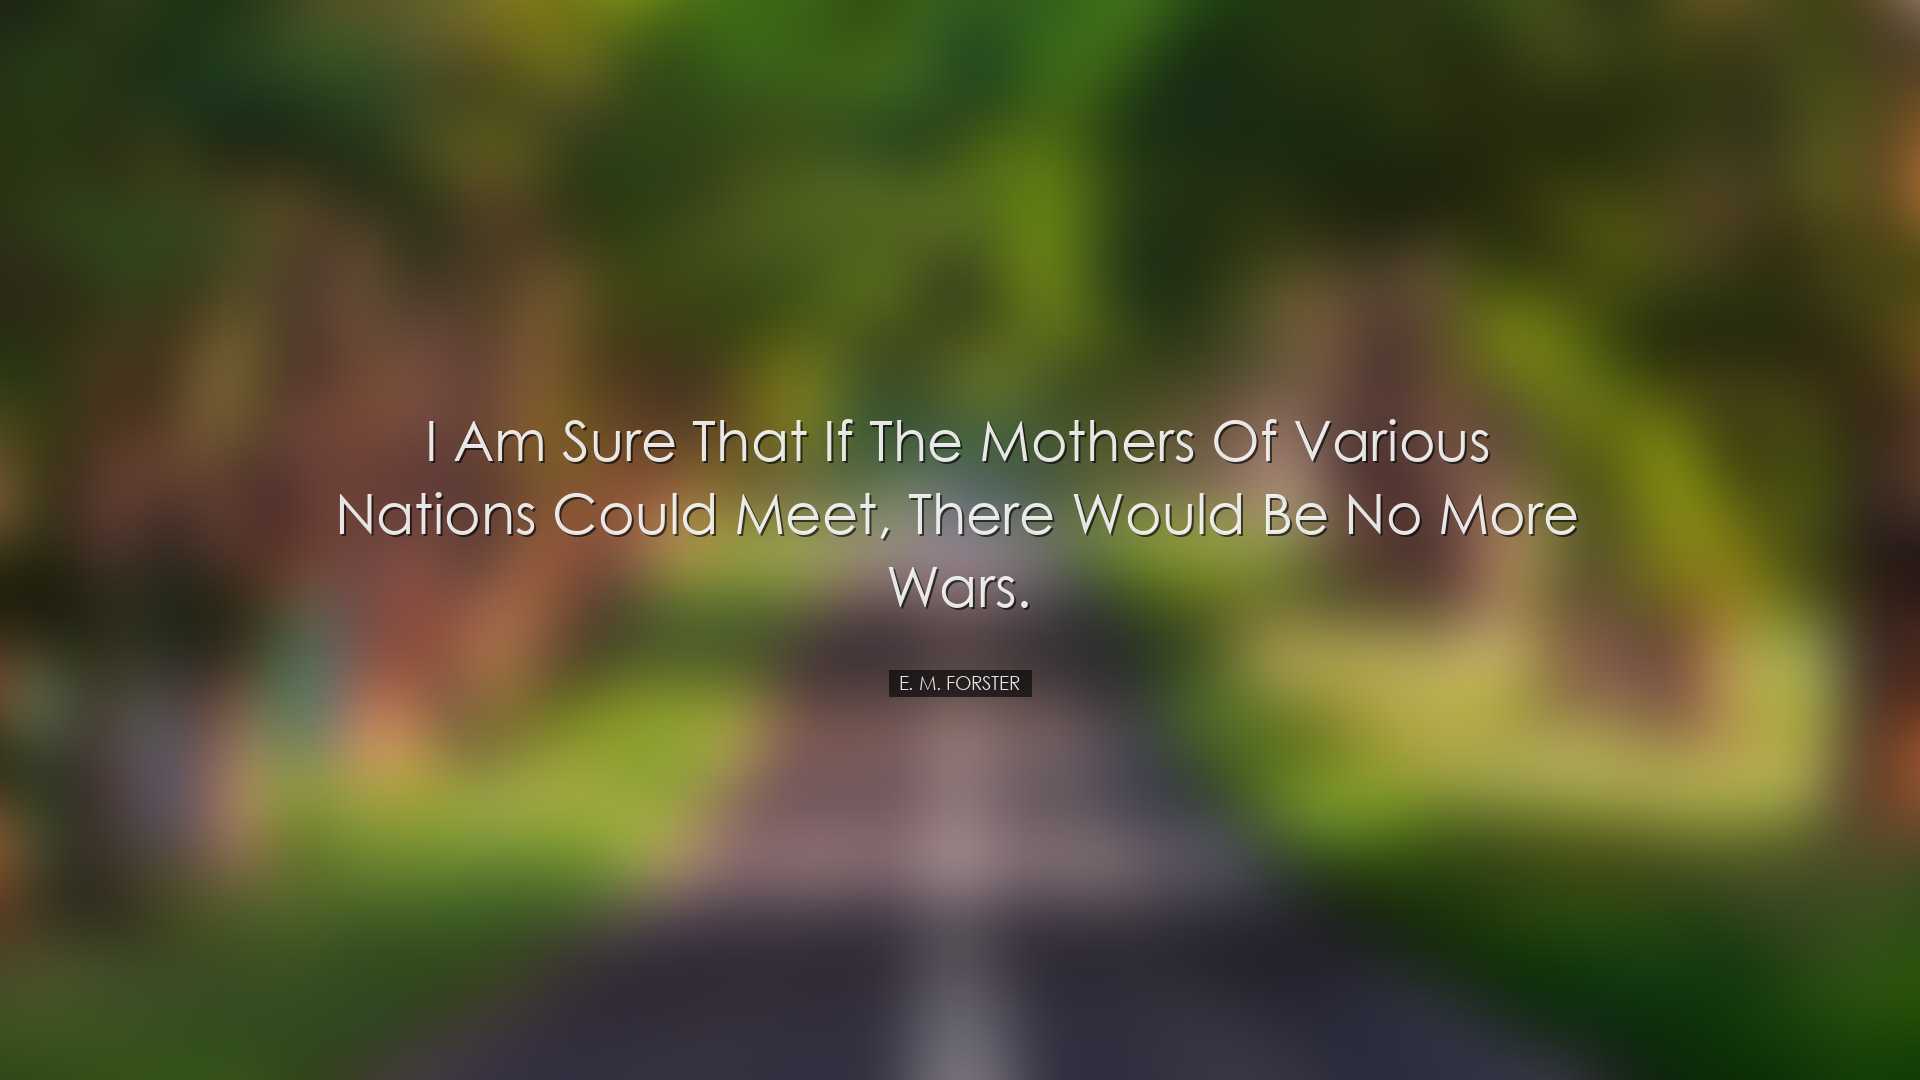 I am sure that if the mothers of various nations could meet, there